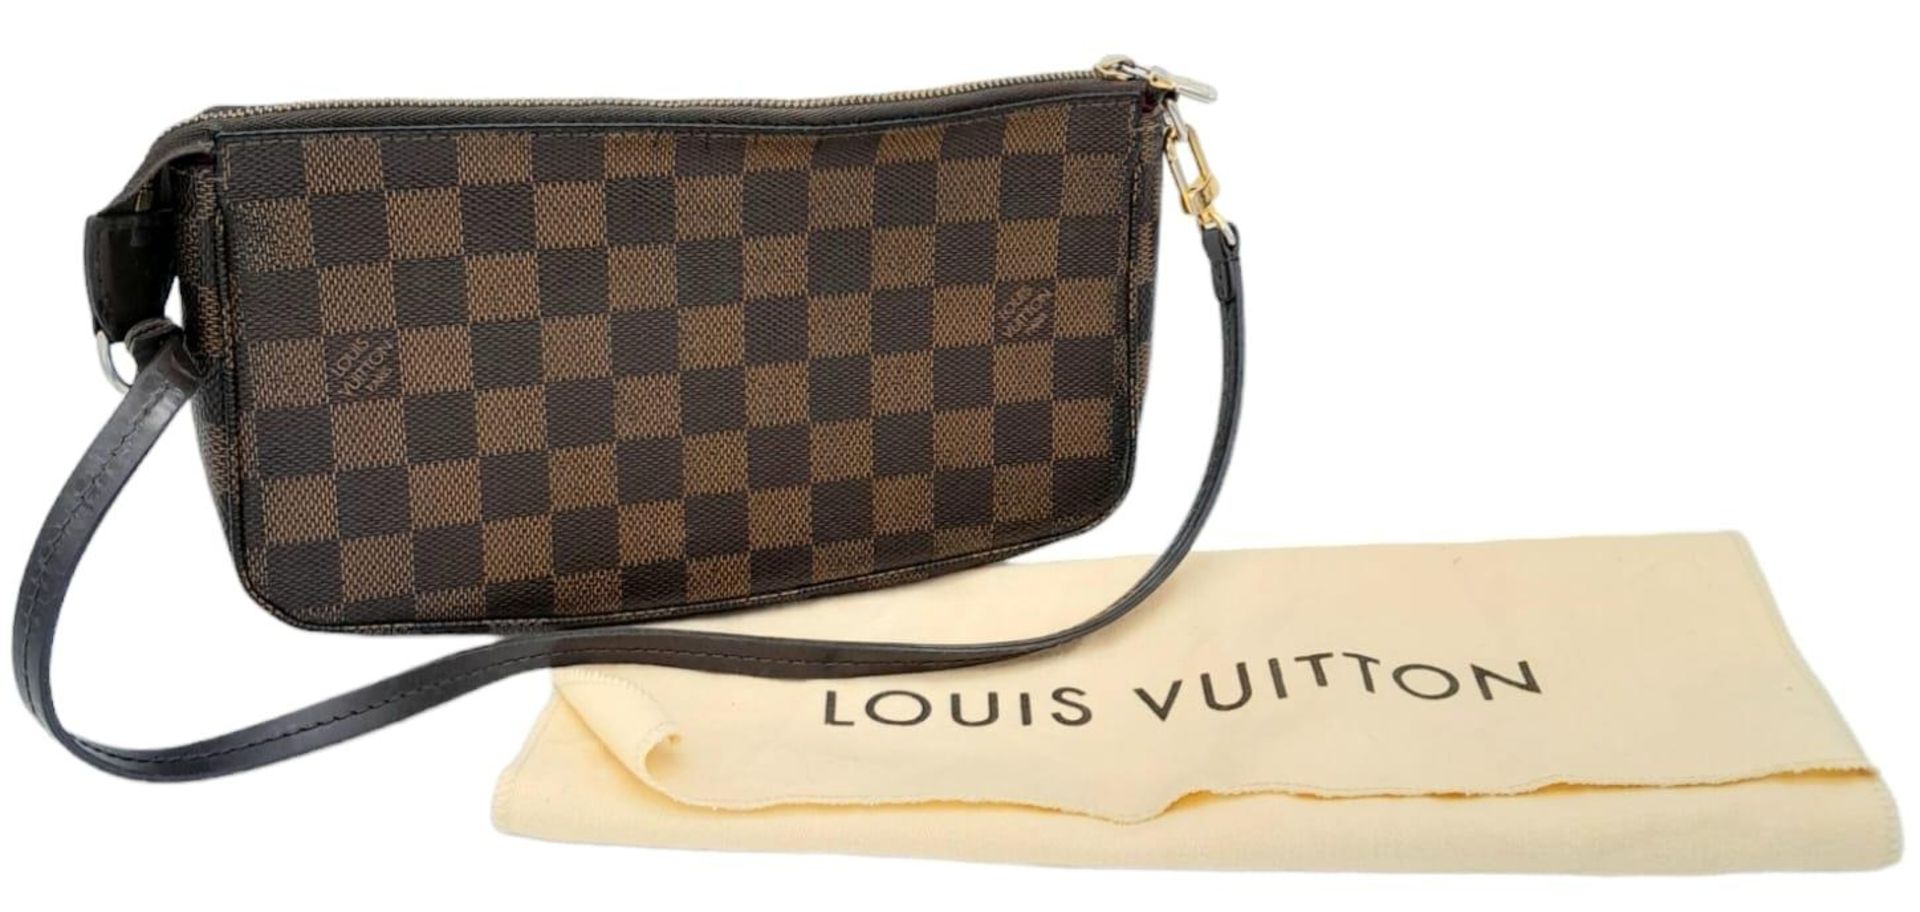 A Louis Vuitton Damier Ebene Pochette with Leather Exterior. Top Zip Closure. Red Fabric Lining with - Image 2 of 7